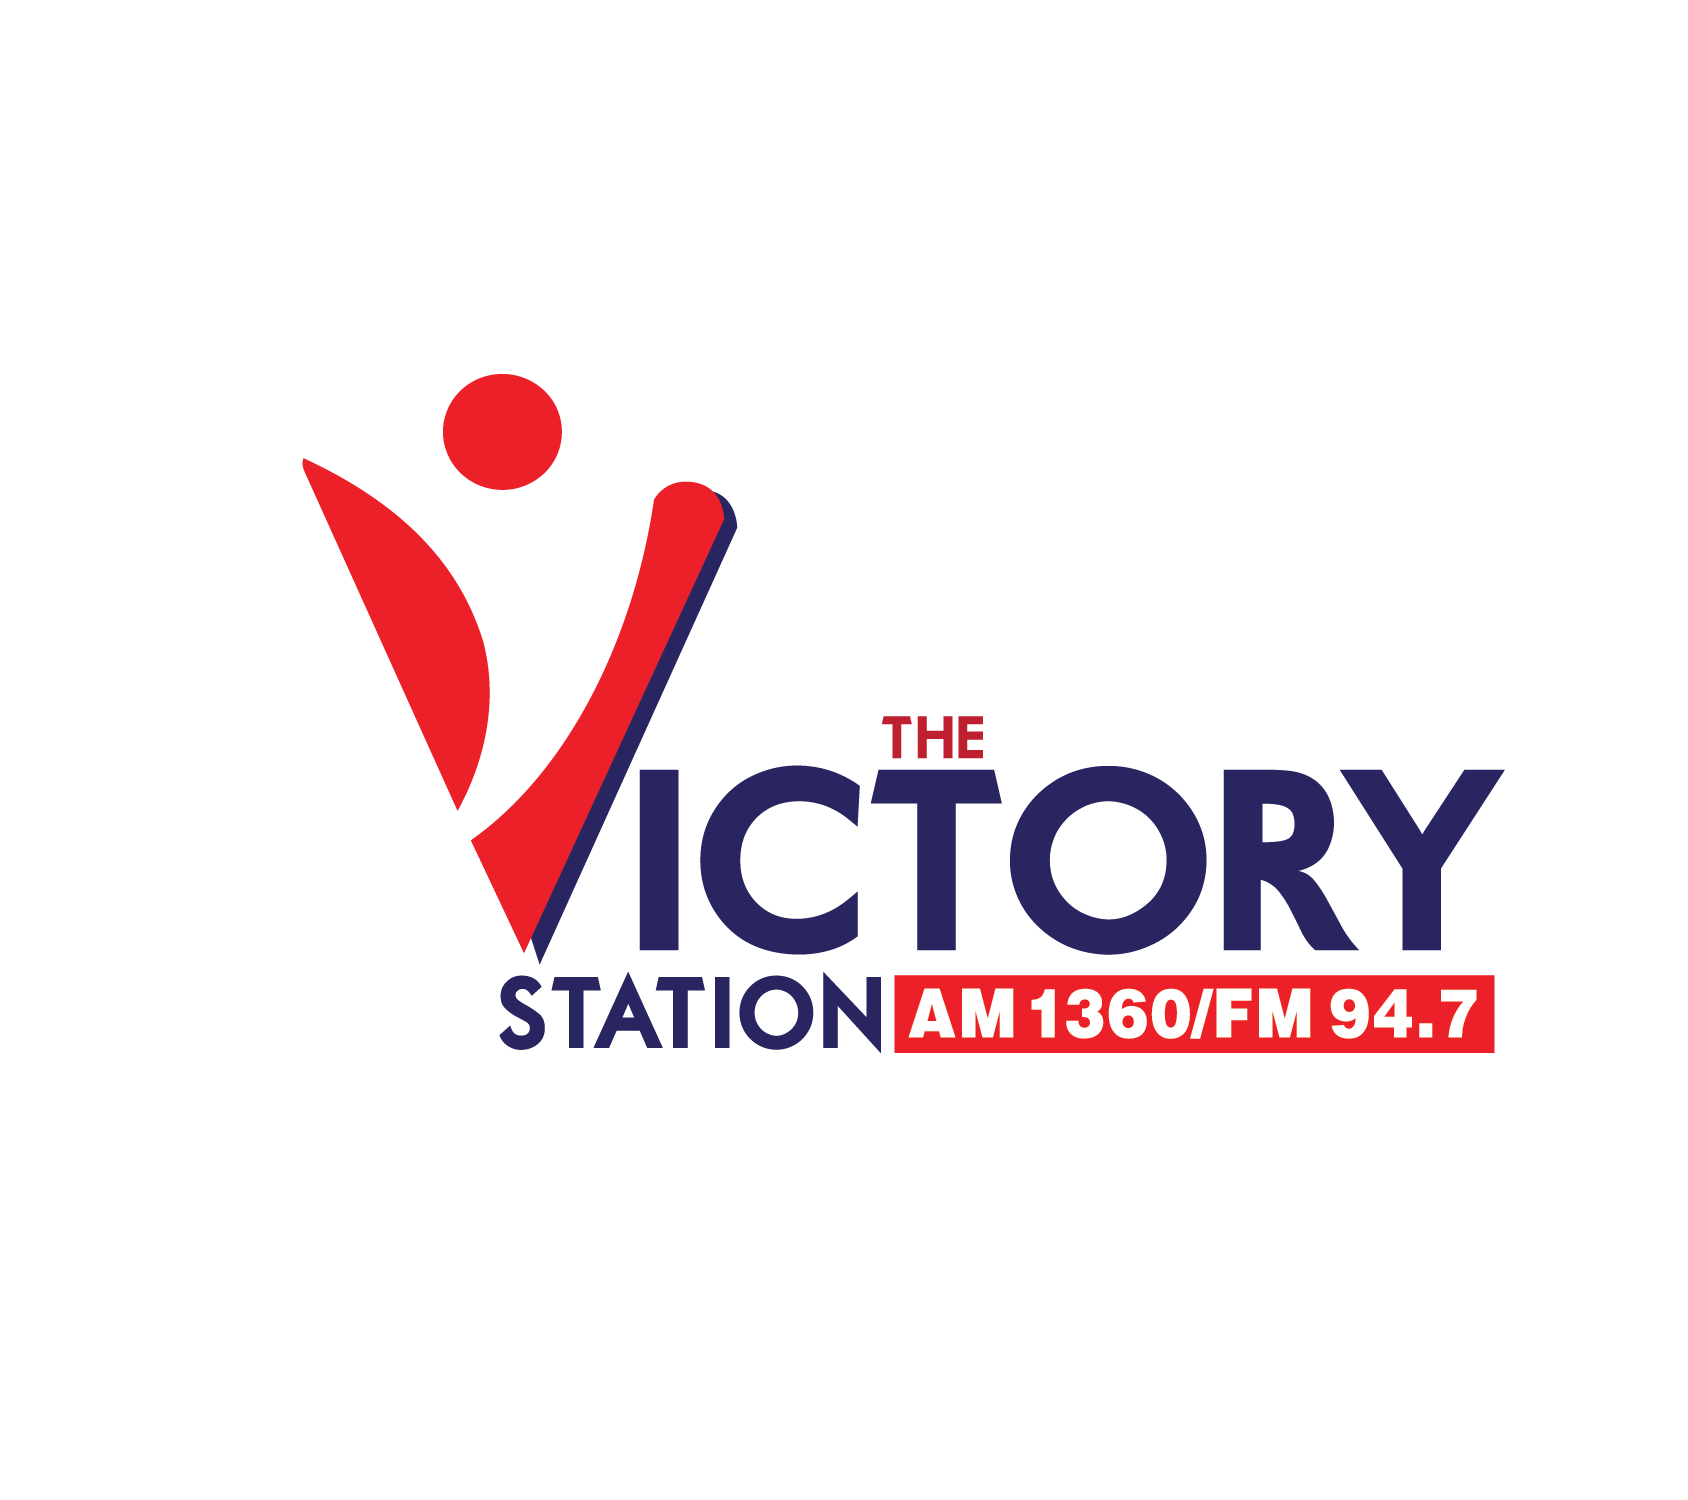 THE VICTORY STATION AM 1360 FM 94.7